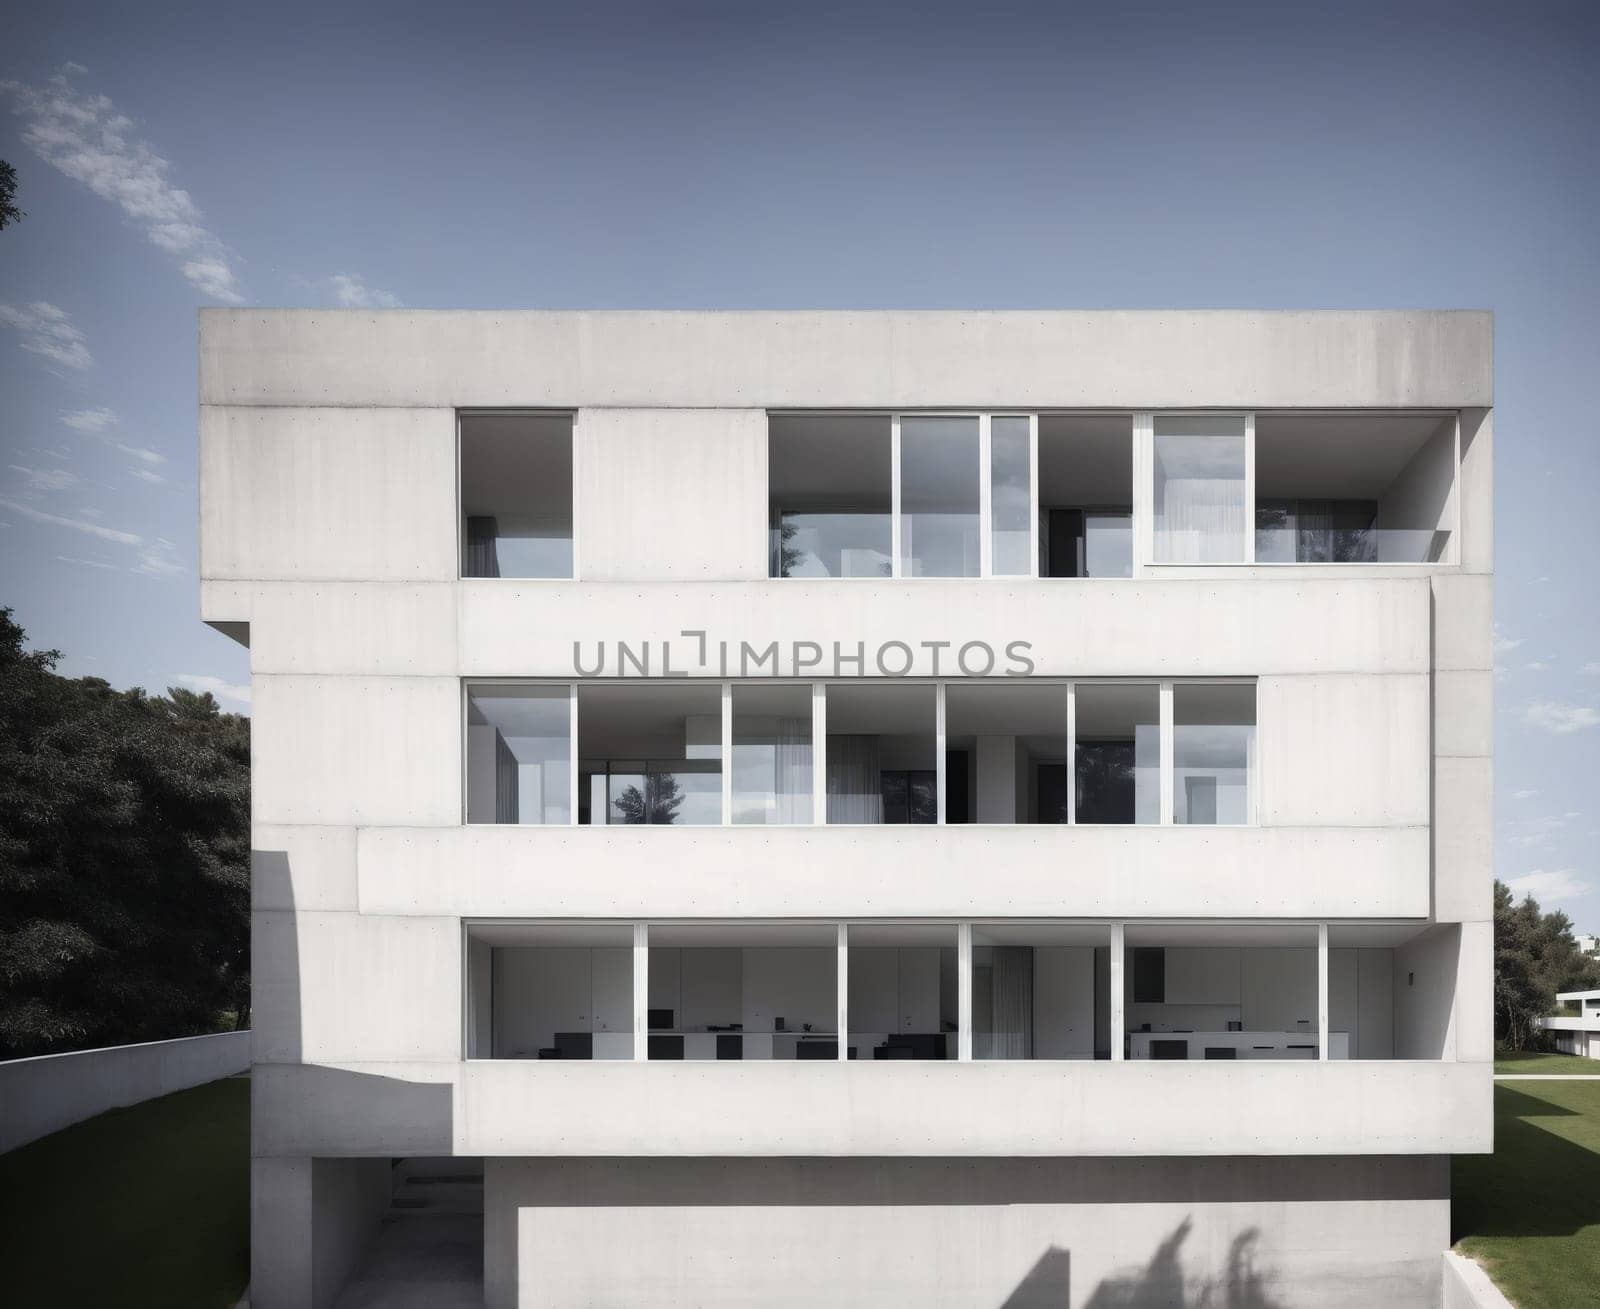 The image shows a modern white building with large windows and balconies on the upper floors, and a small garden in front of it.